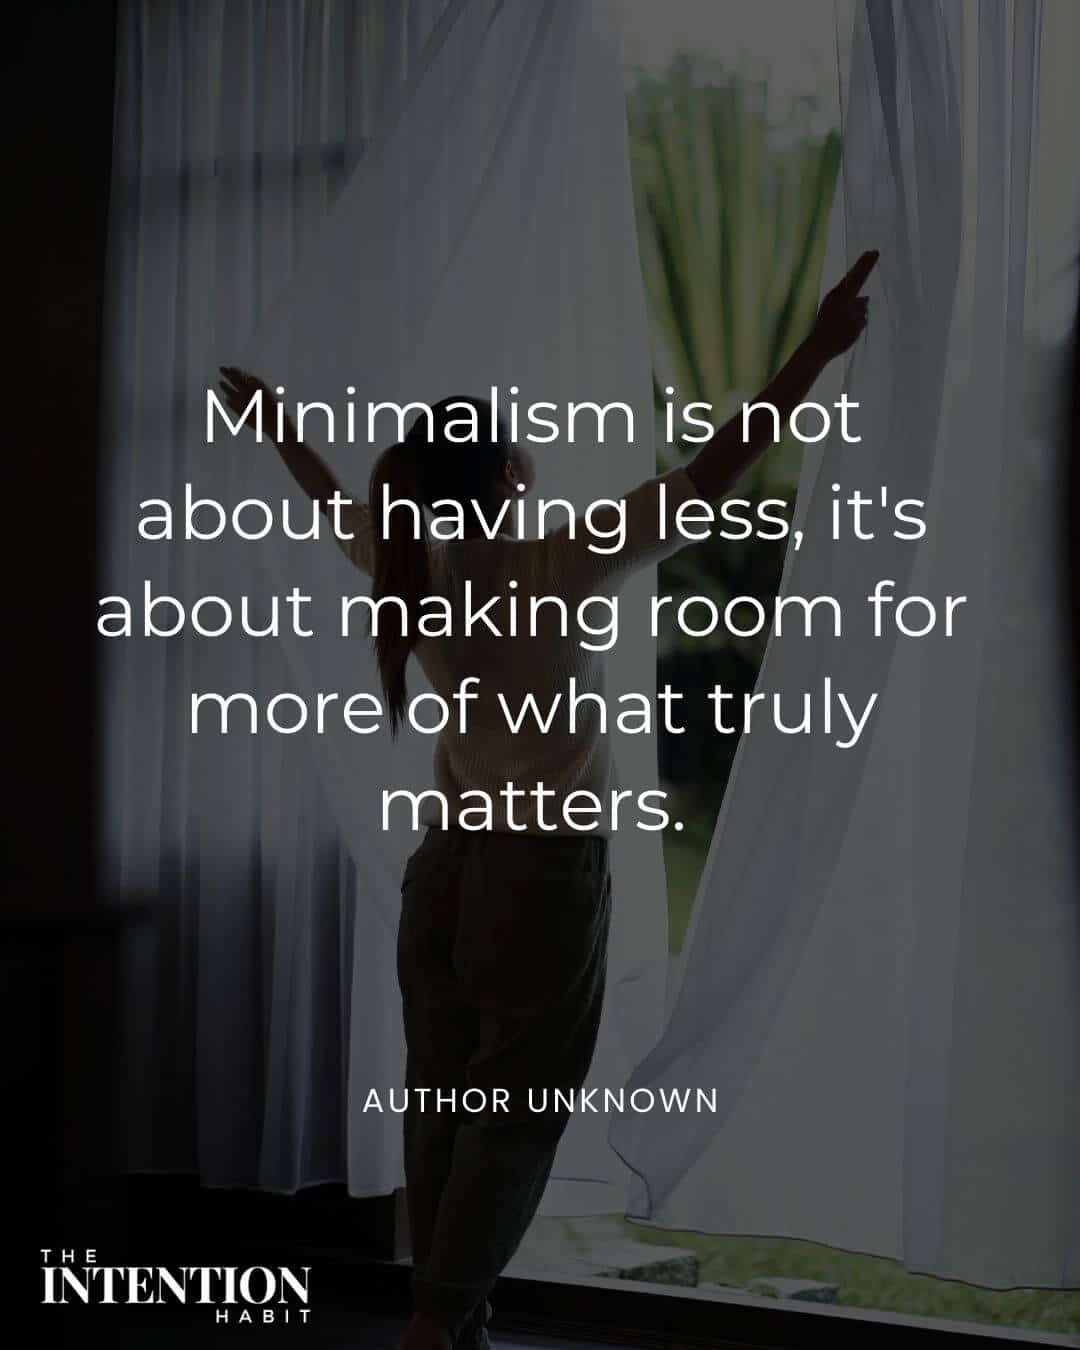 simple living quote - minimalism is not about having less, it's about. making room for more of what matters